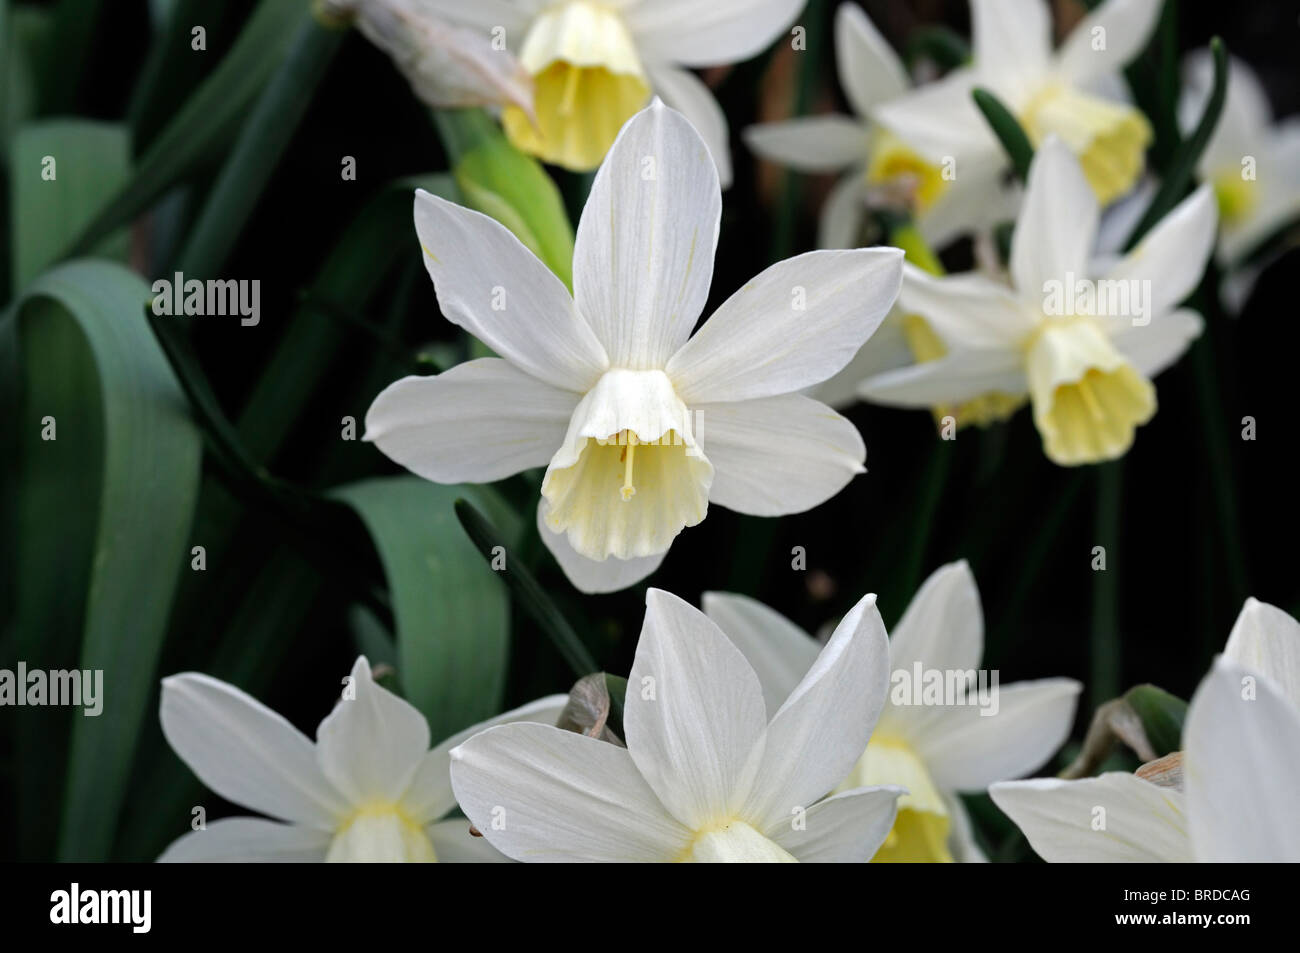 Narcissus sailboat Daffodil macro photo Close up flower bloom blossom Jonquil hybrid white petals pale yellow cup turns cream Stock Photo